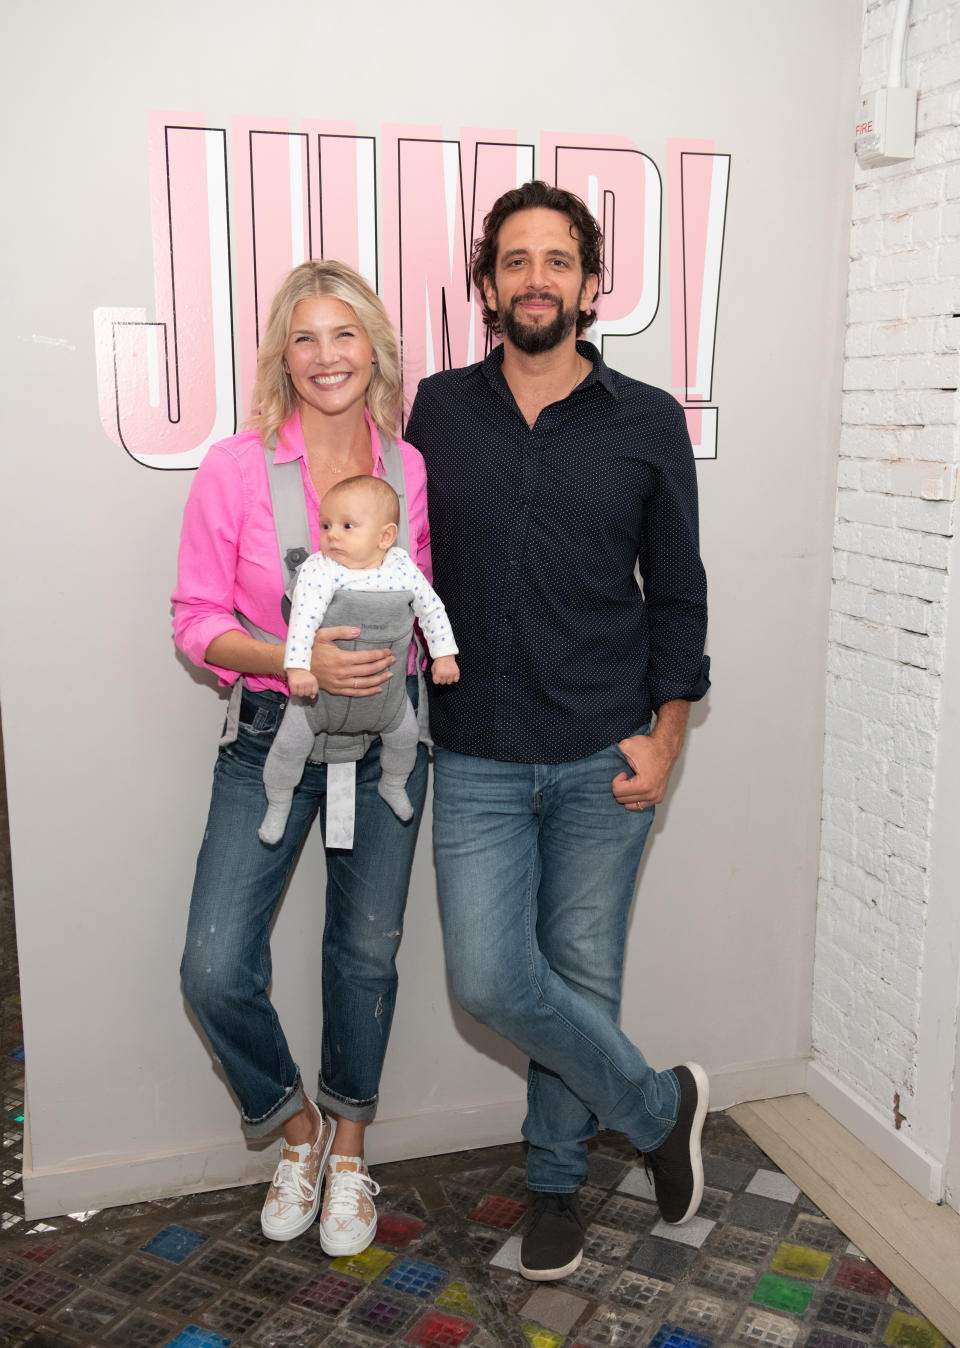 NEW YORK, NEW YORK - AUGUST 27: Amanda Kloots and Nick Cordero attend the Beyond Yoga x Amanda Kloots Collaboration Launch Event on August 27, 2019 in New York City. (Photo by Noam Galai/Getty Images for Beyond Yoga)